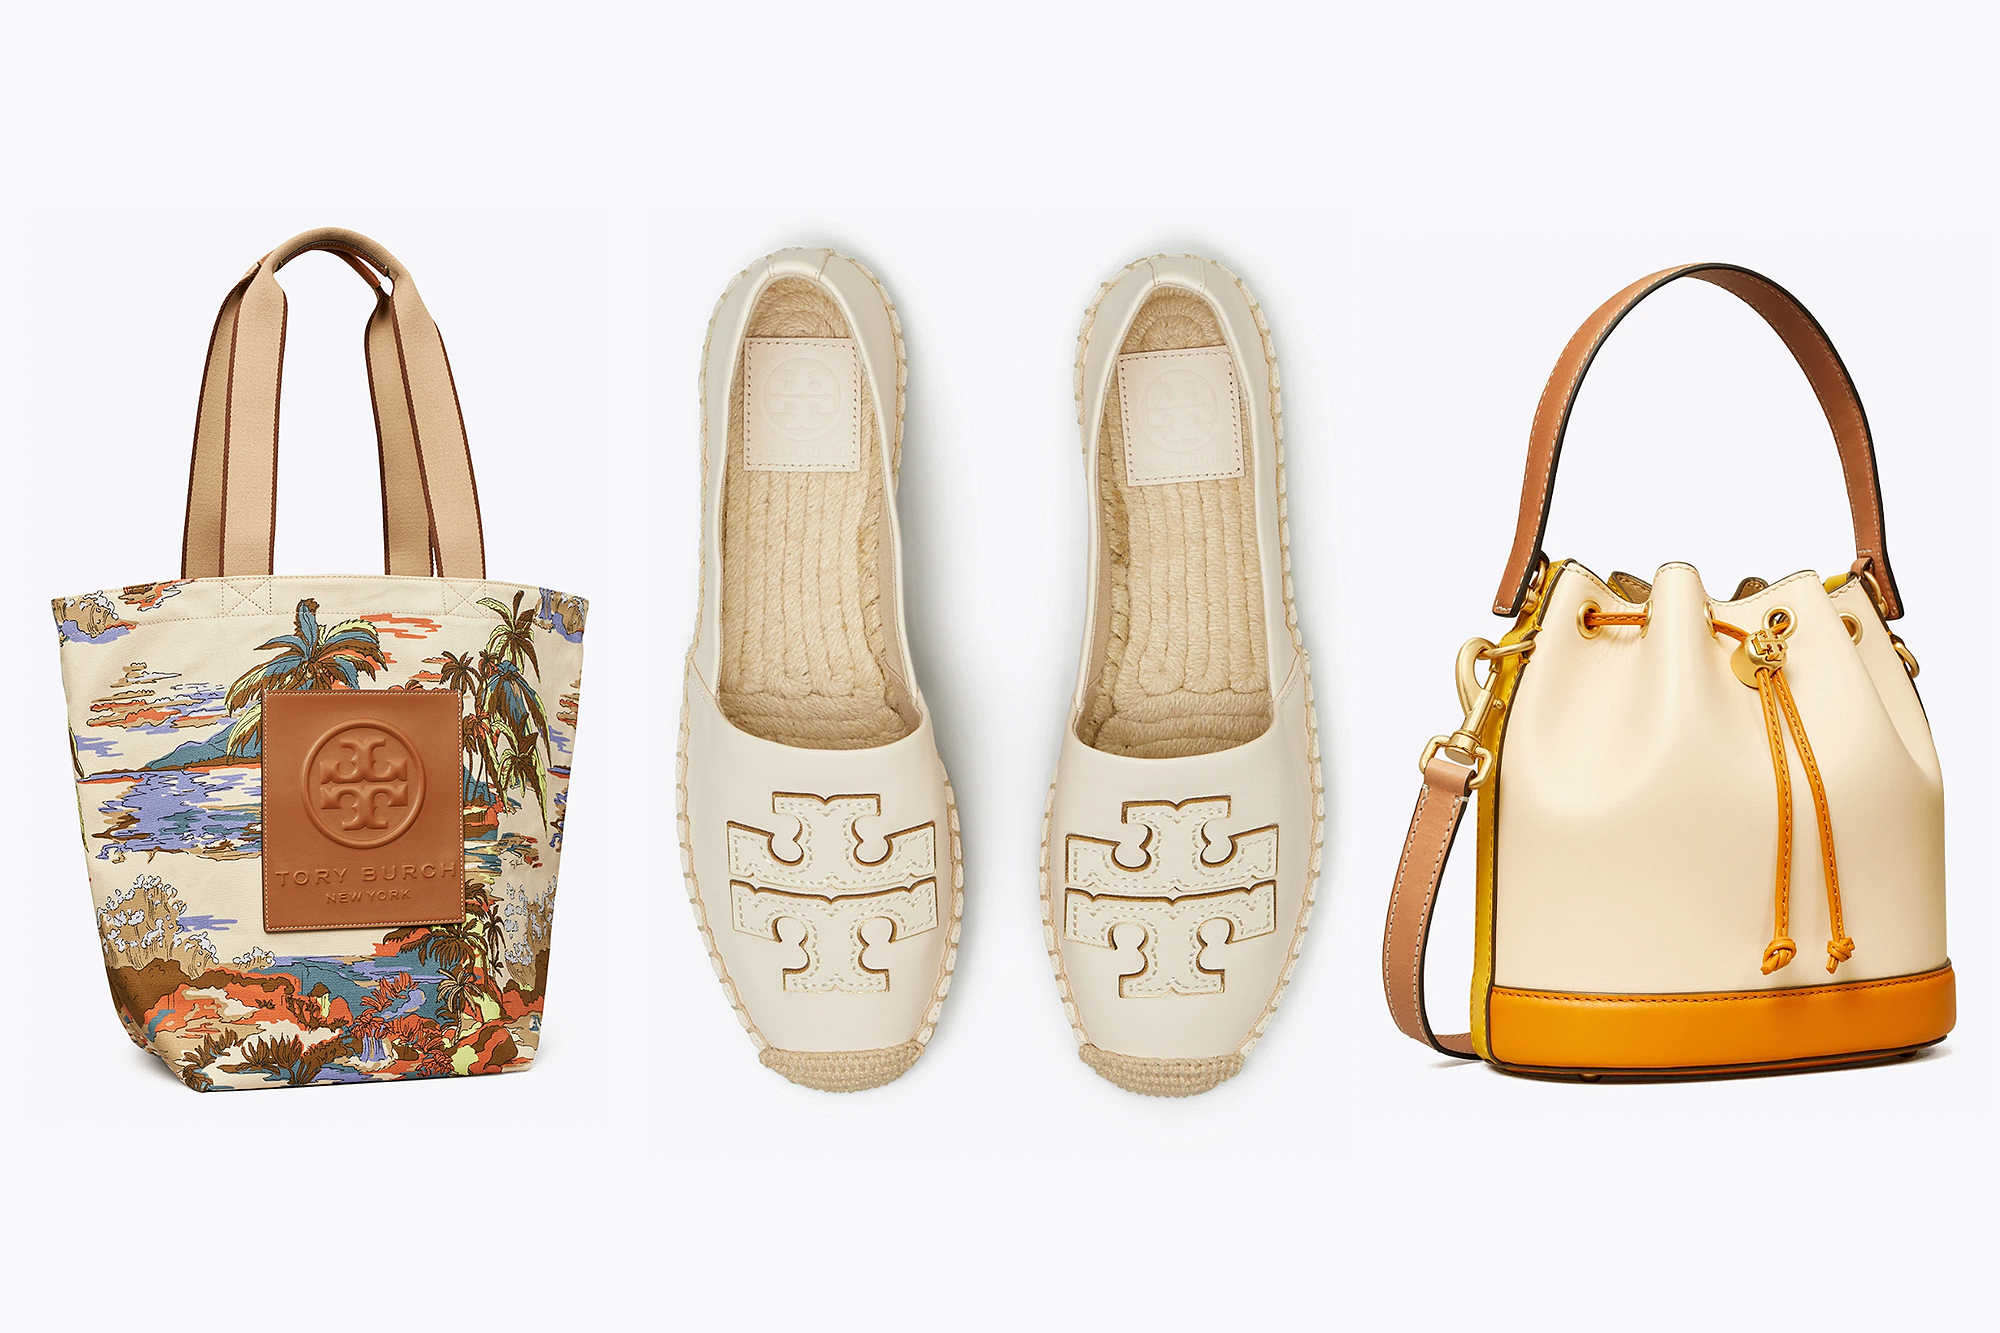 Tory Burch Semi-Annual Sale Is Back: What to Shop